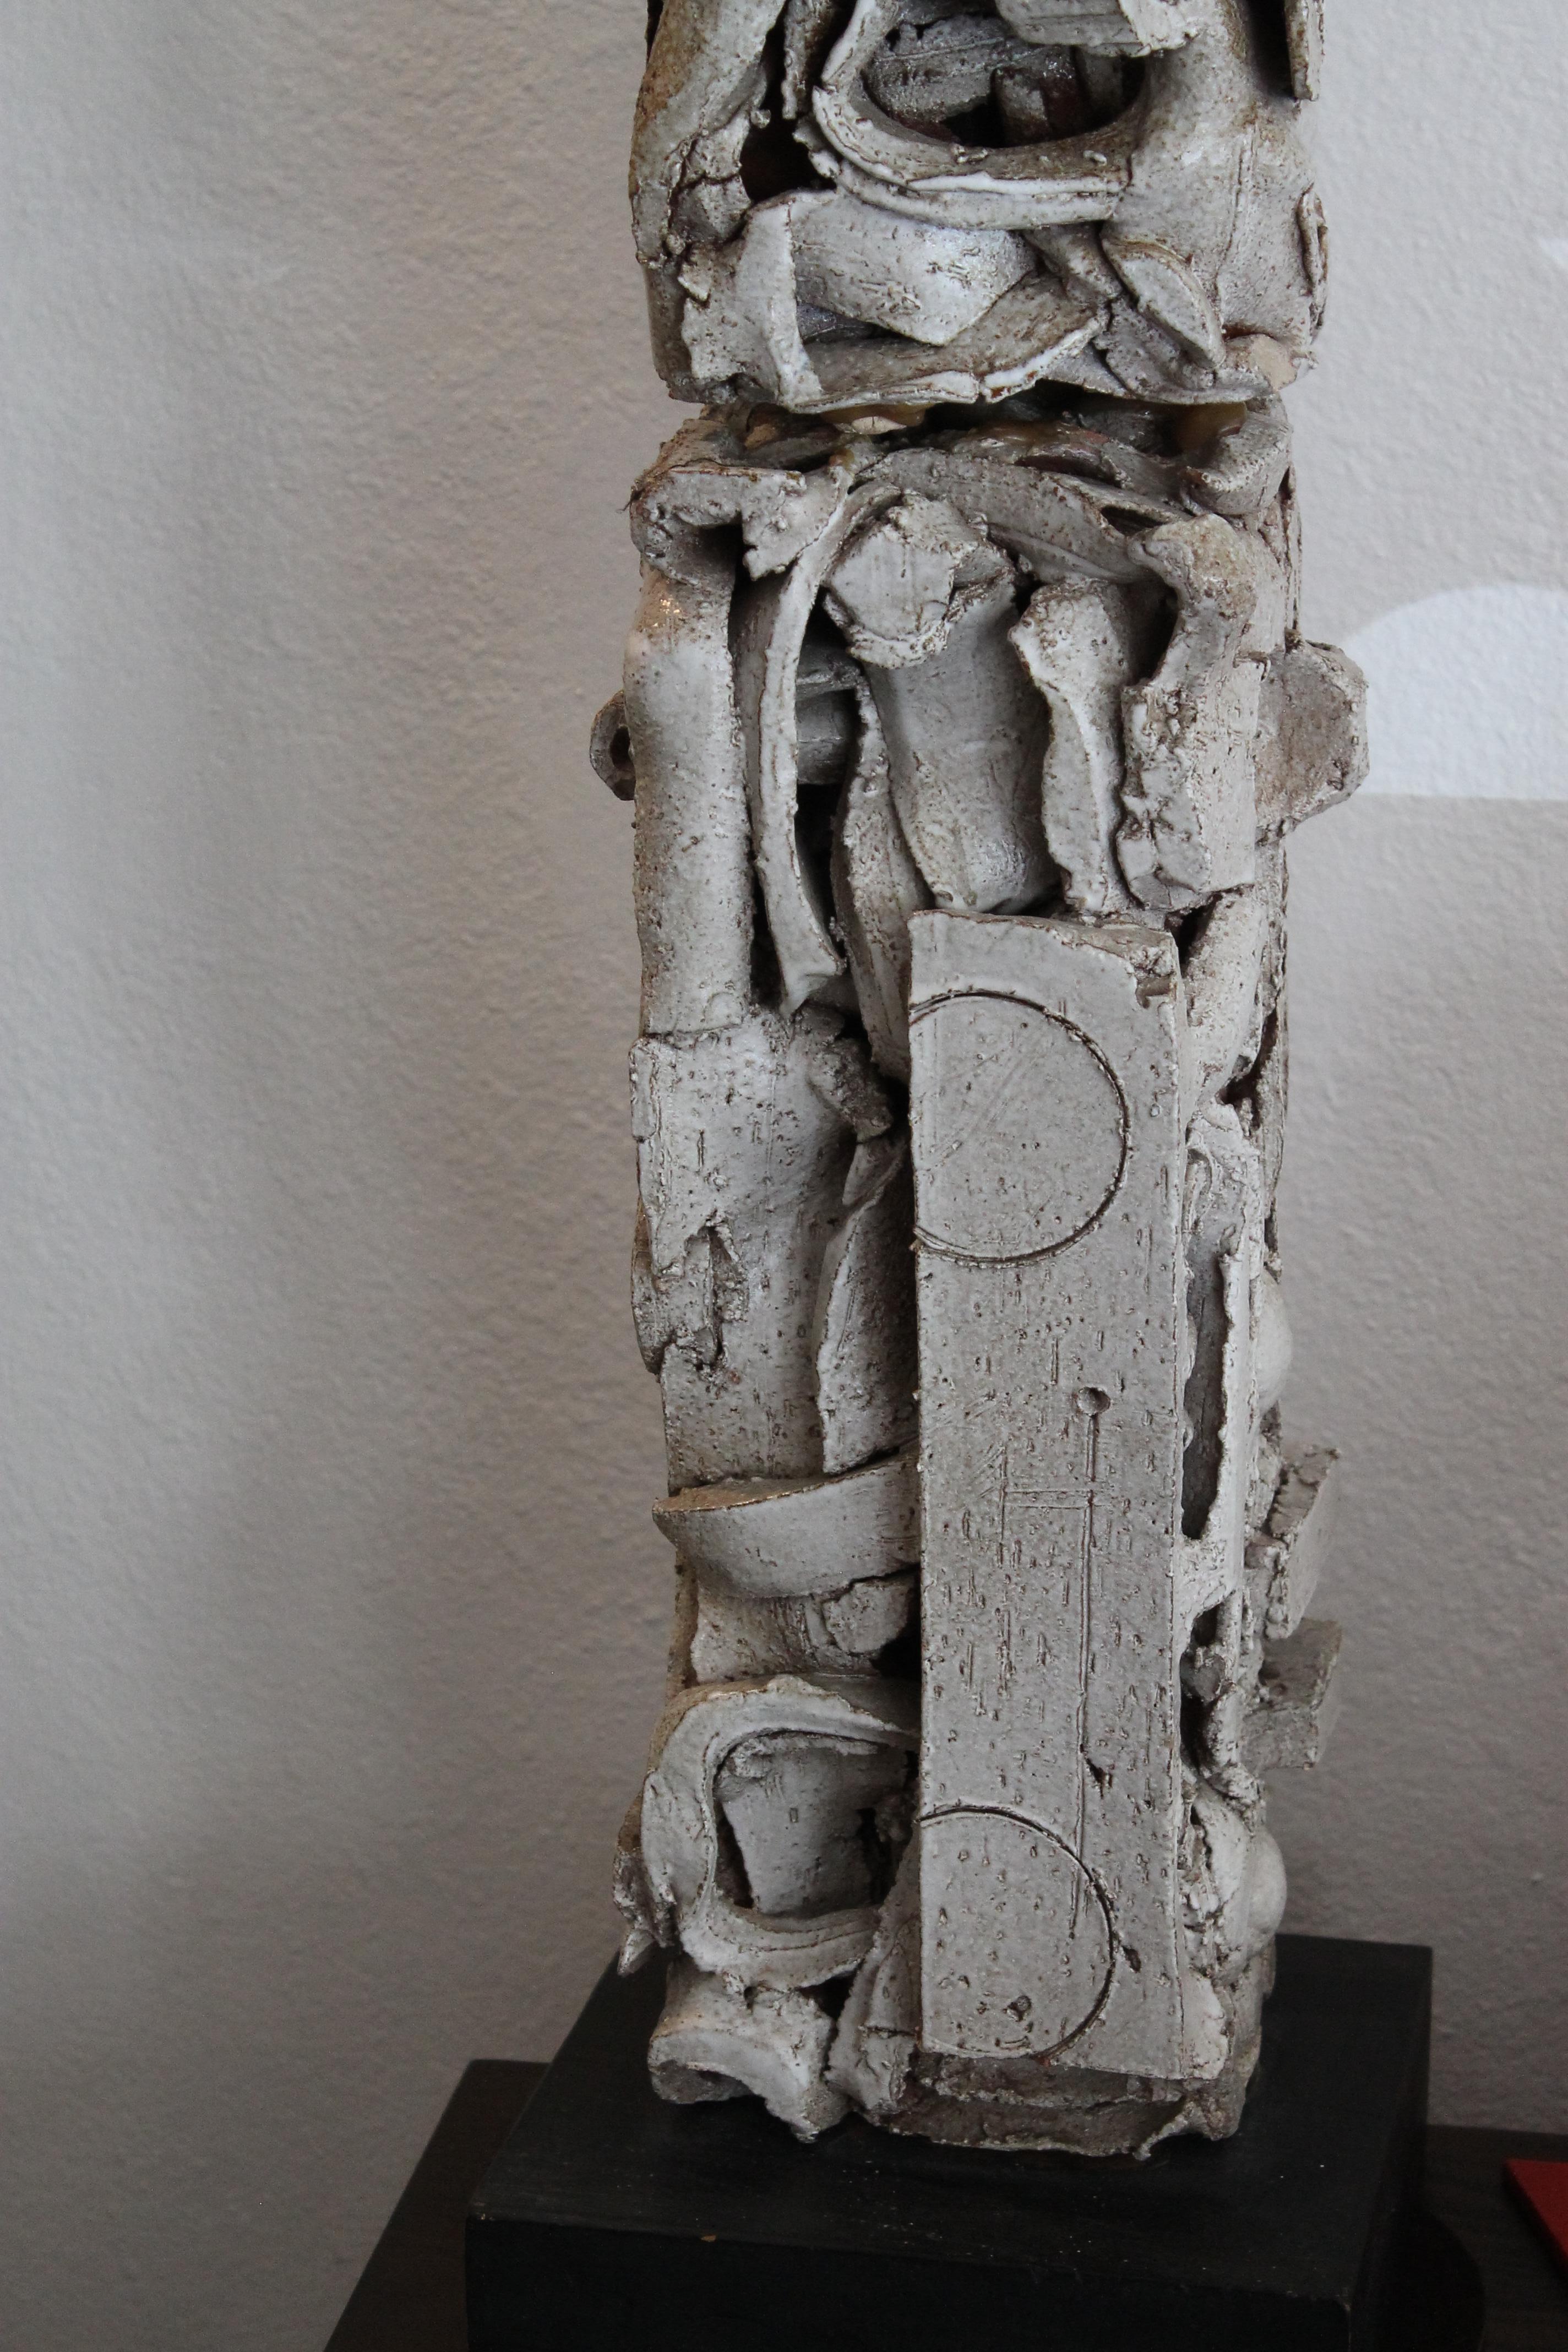 Totem two-piece ceramic sculpture signed and dated 1970 on stand. Ceramic portion consists of 2 pieces. Both in place measure 6.5